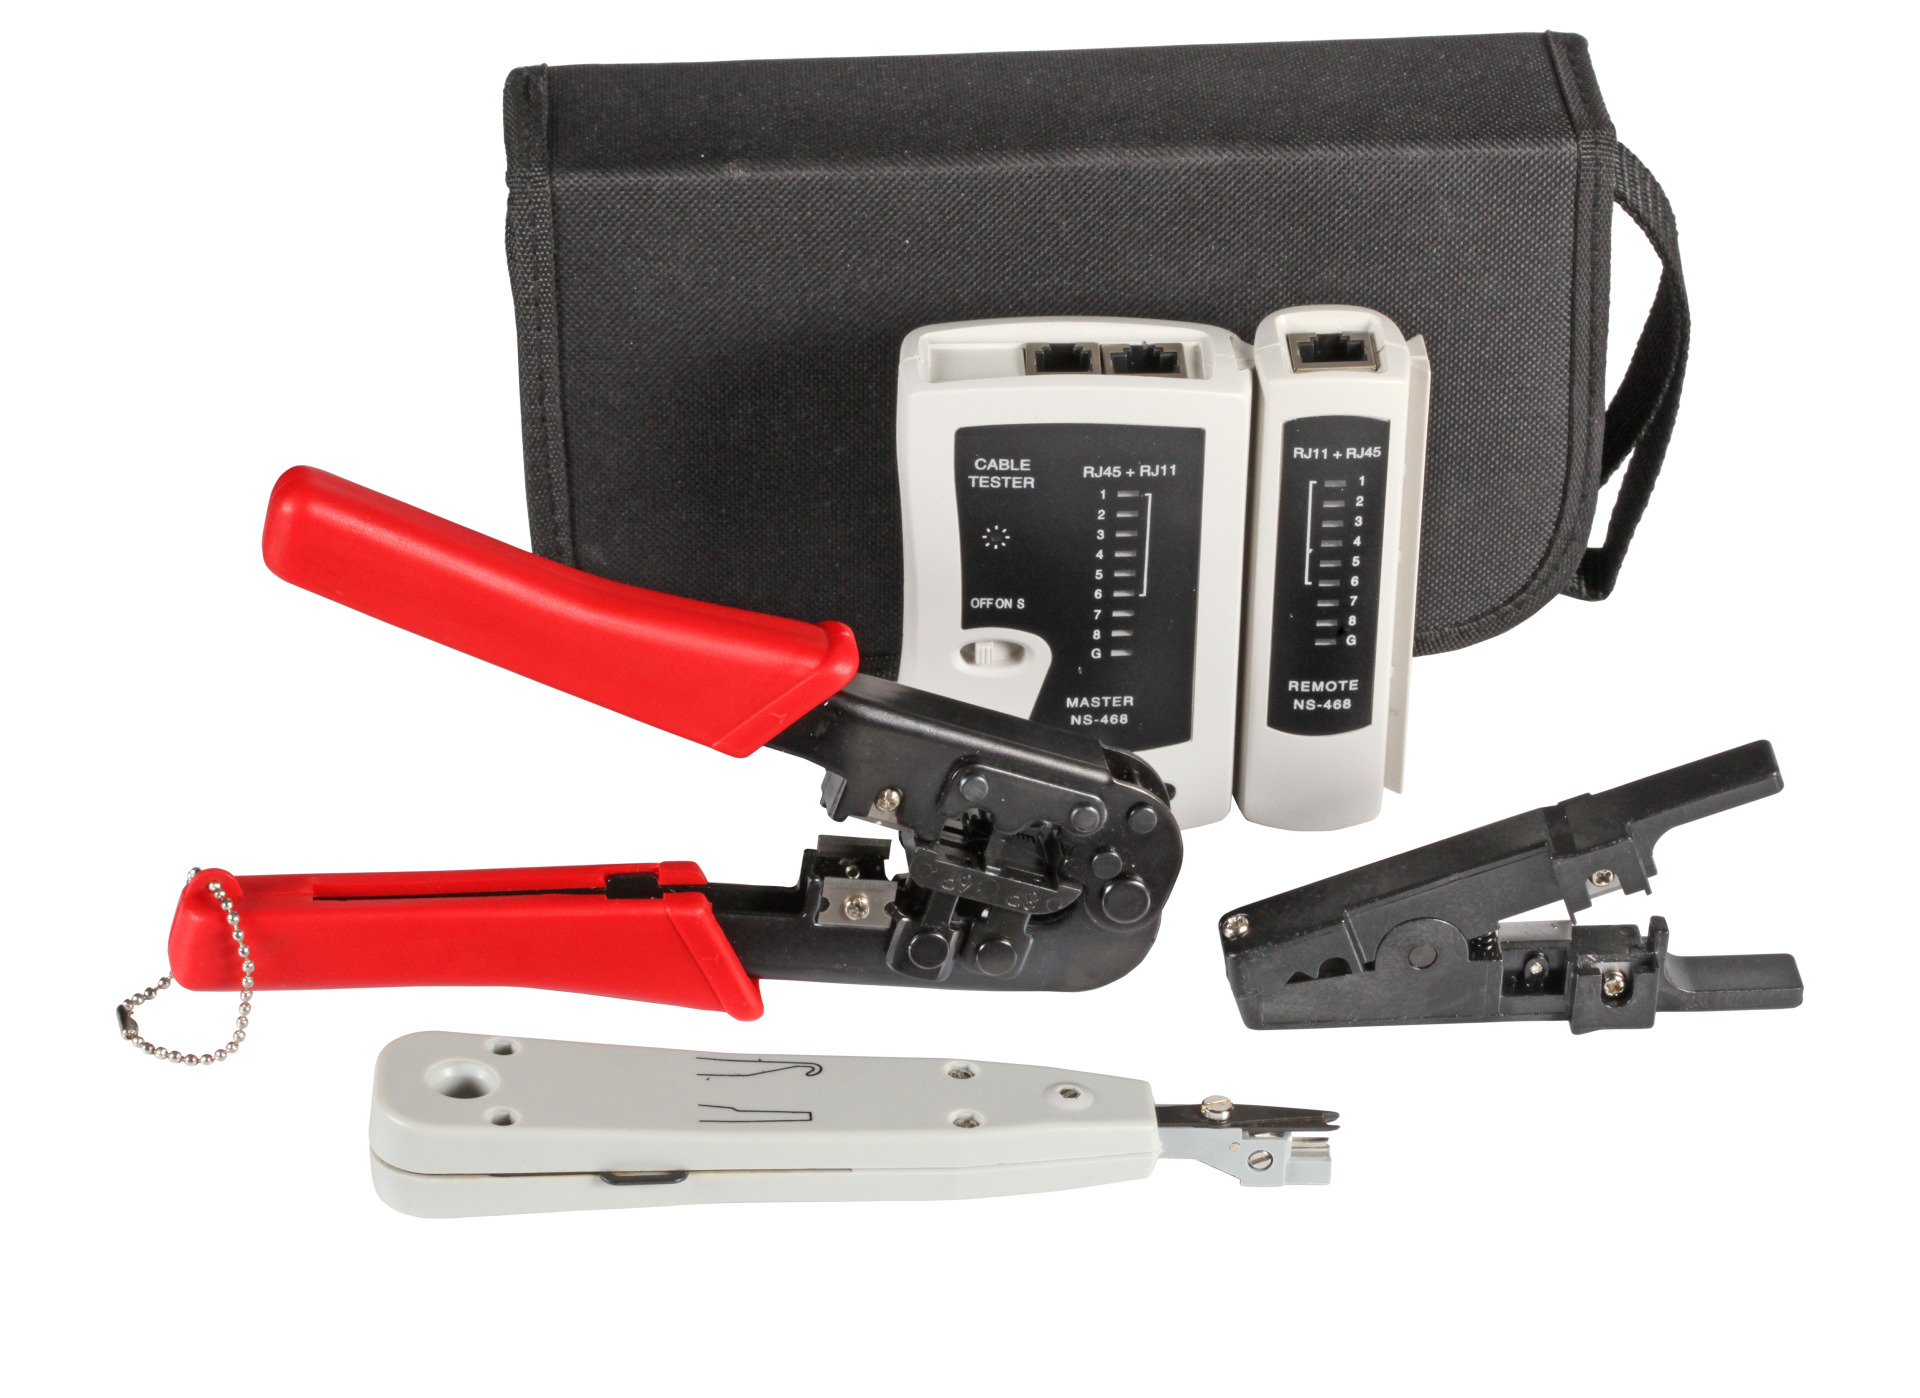 Network Tool Kit with 4 units